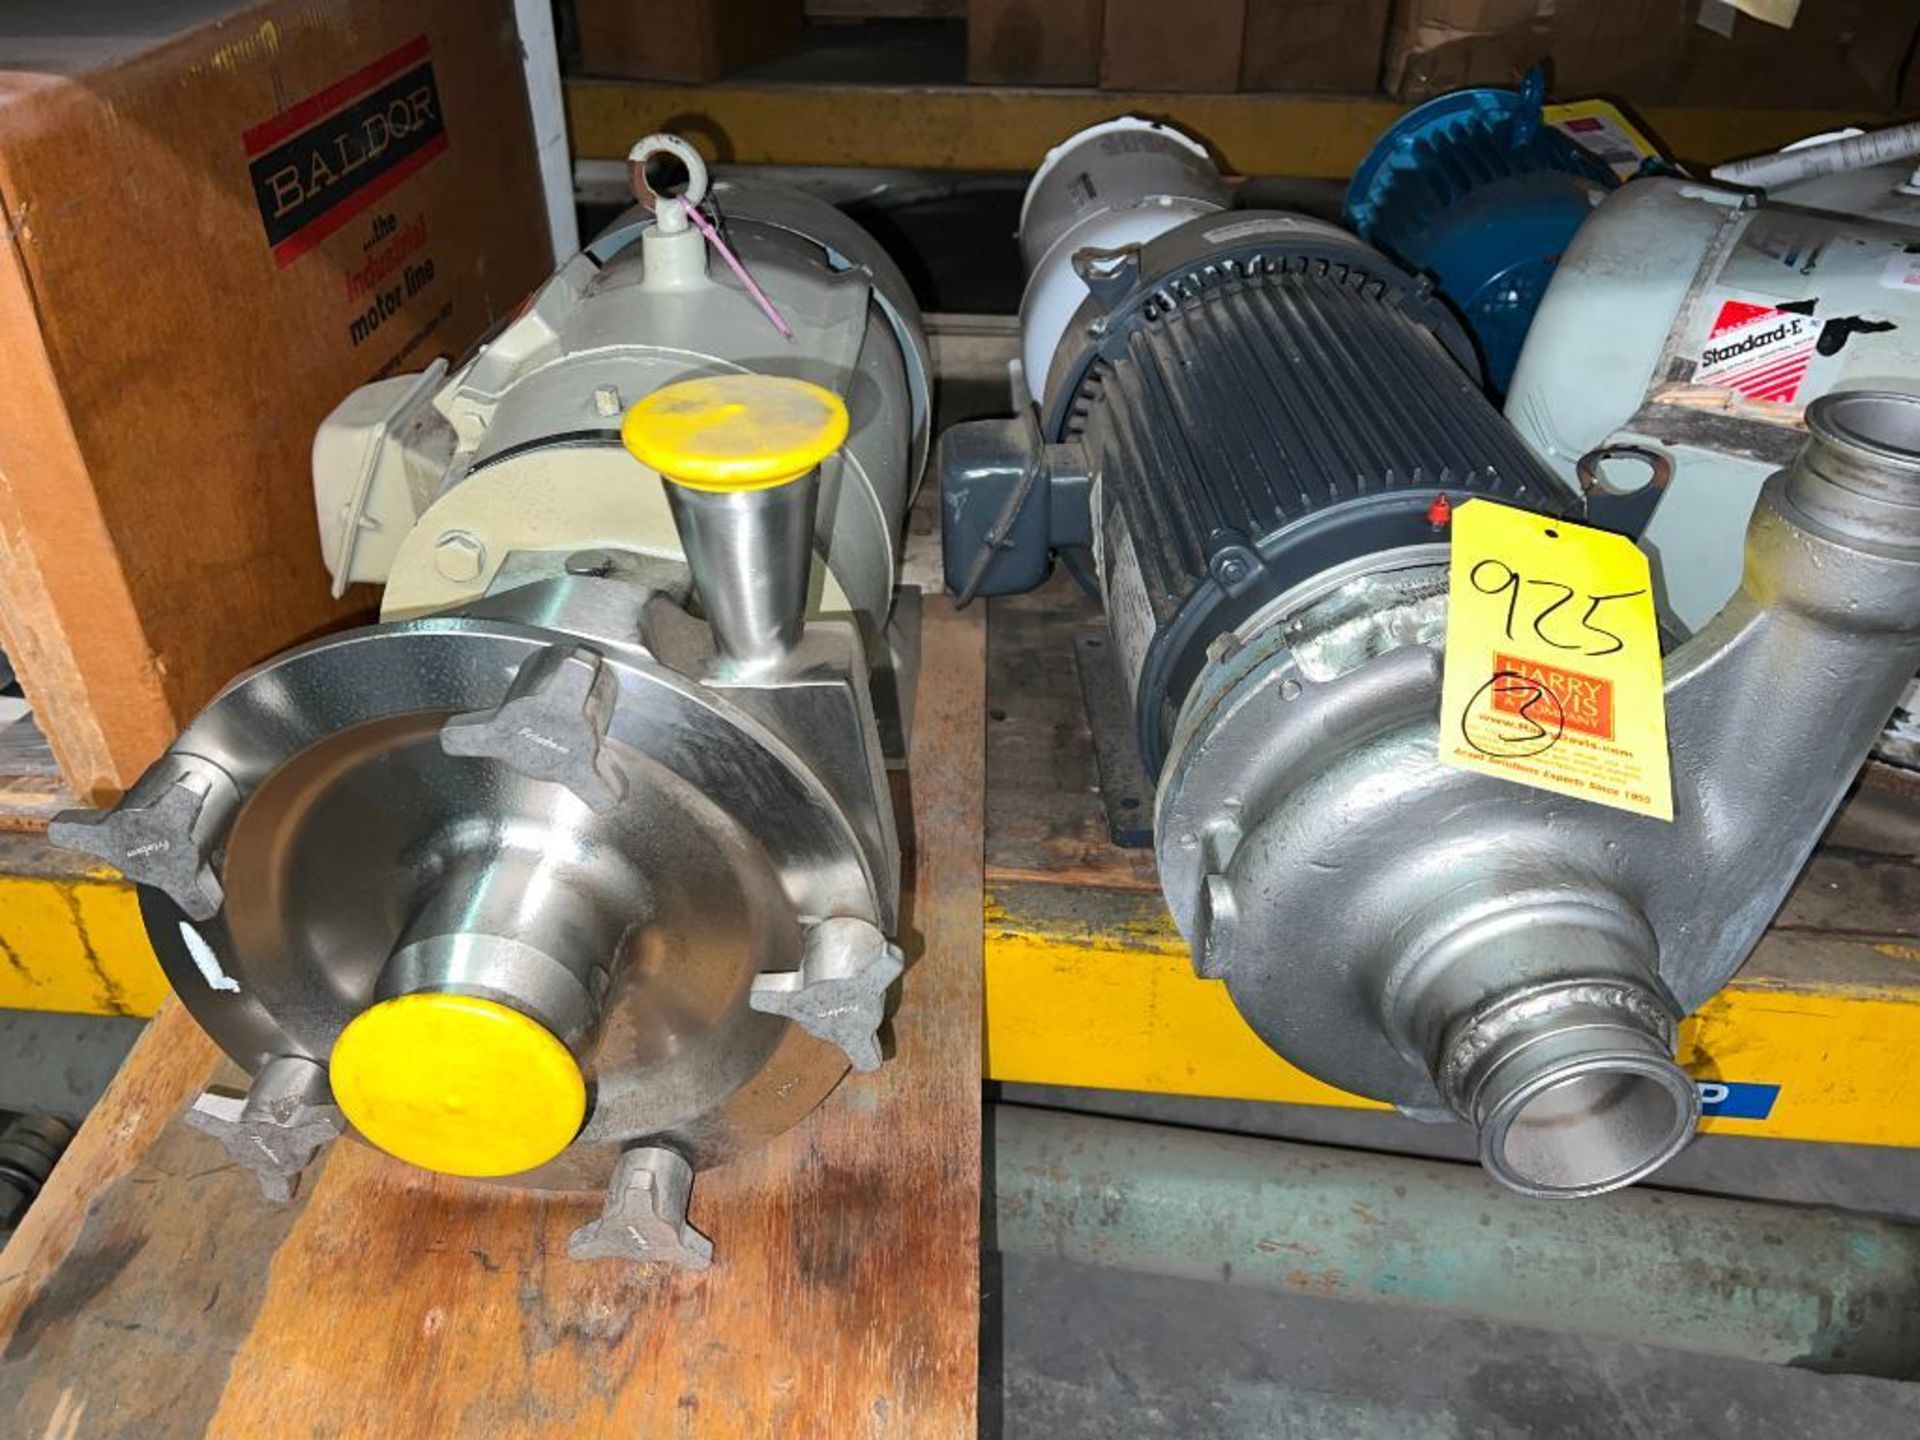 (3) Fristam and Ampco Centrifugal Pumps with Motors from 7.5 HP to 10 HP and 2.5"" x 2"" S/S Head